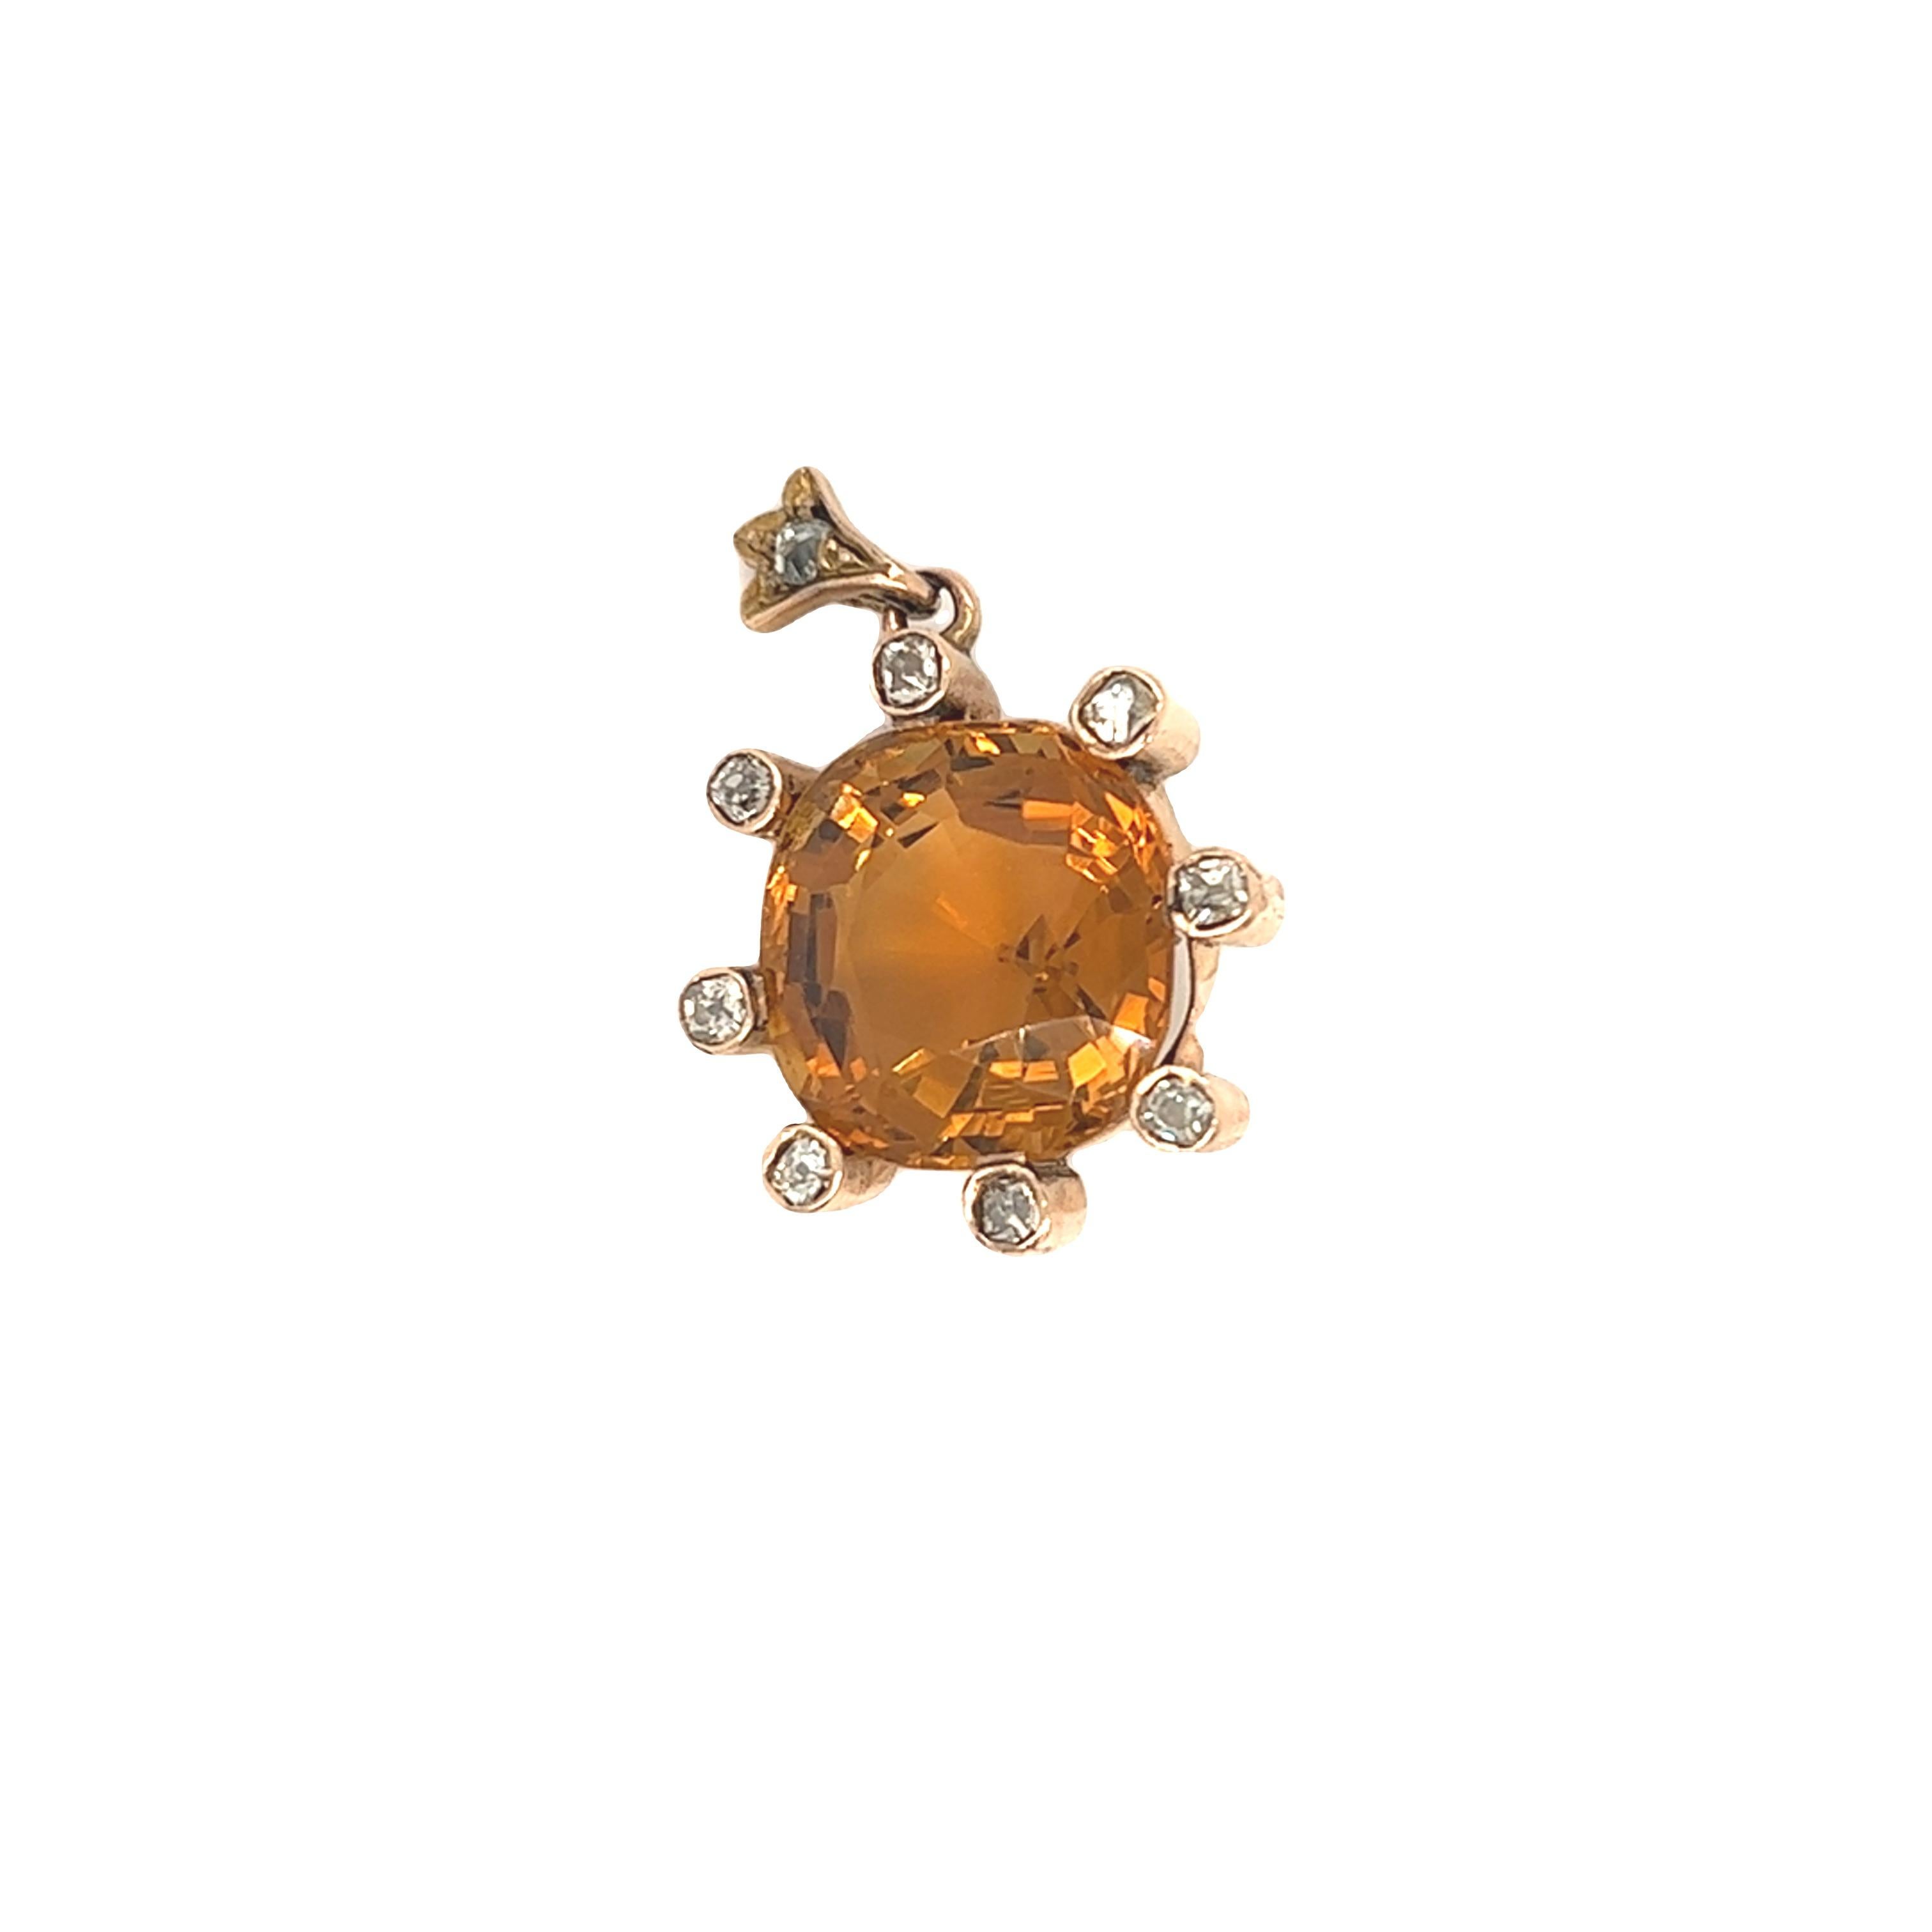 This beautiful nature inspired antique pendant features a square cushion shaped yellow citrine weighing approximately 14 carats. The citrine is encircled with old mine cut diamond weighing 0.25 carat in total.

Citrine: 14 carats (approx)
Diamond: